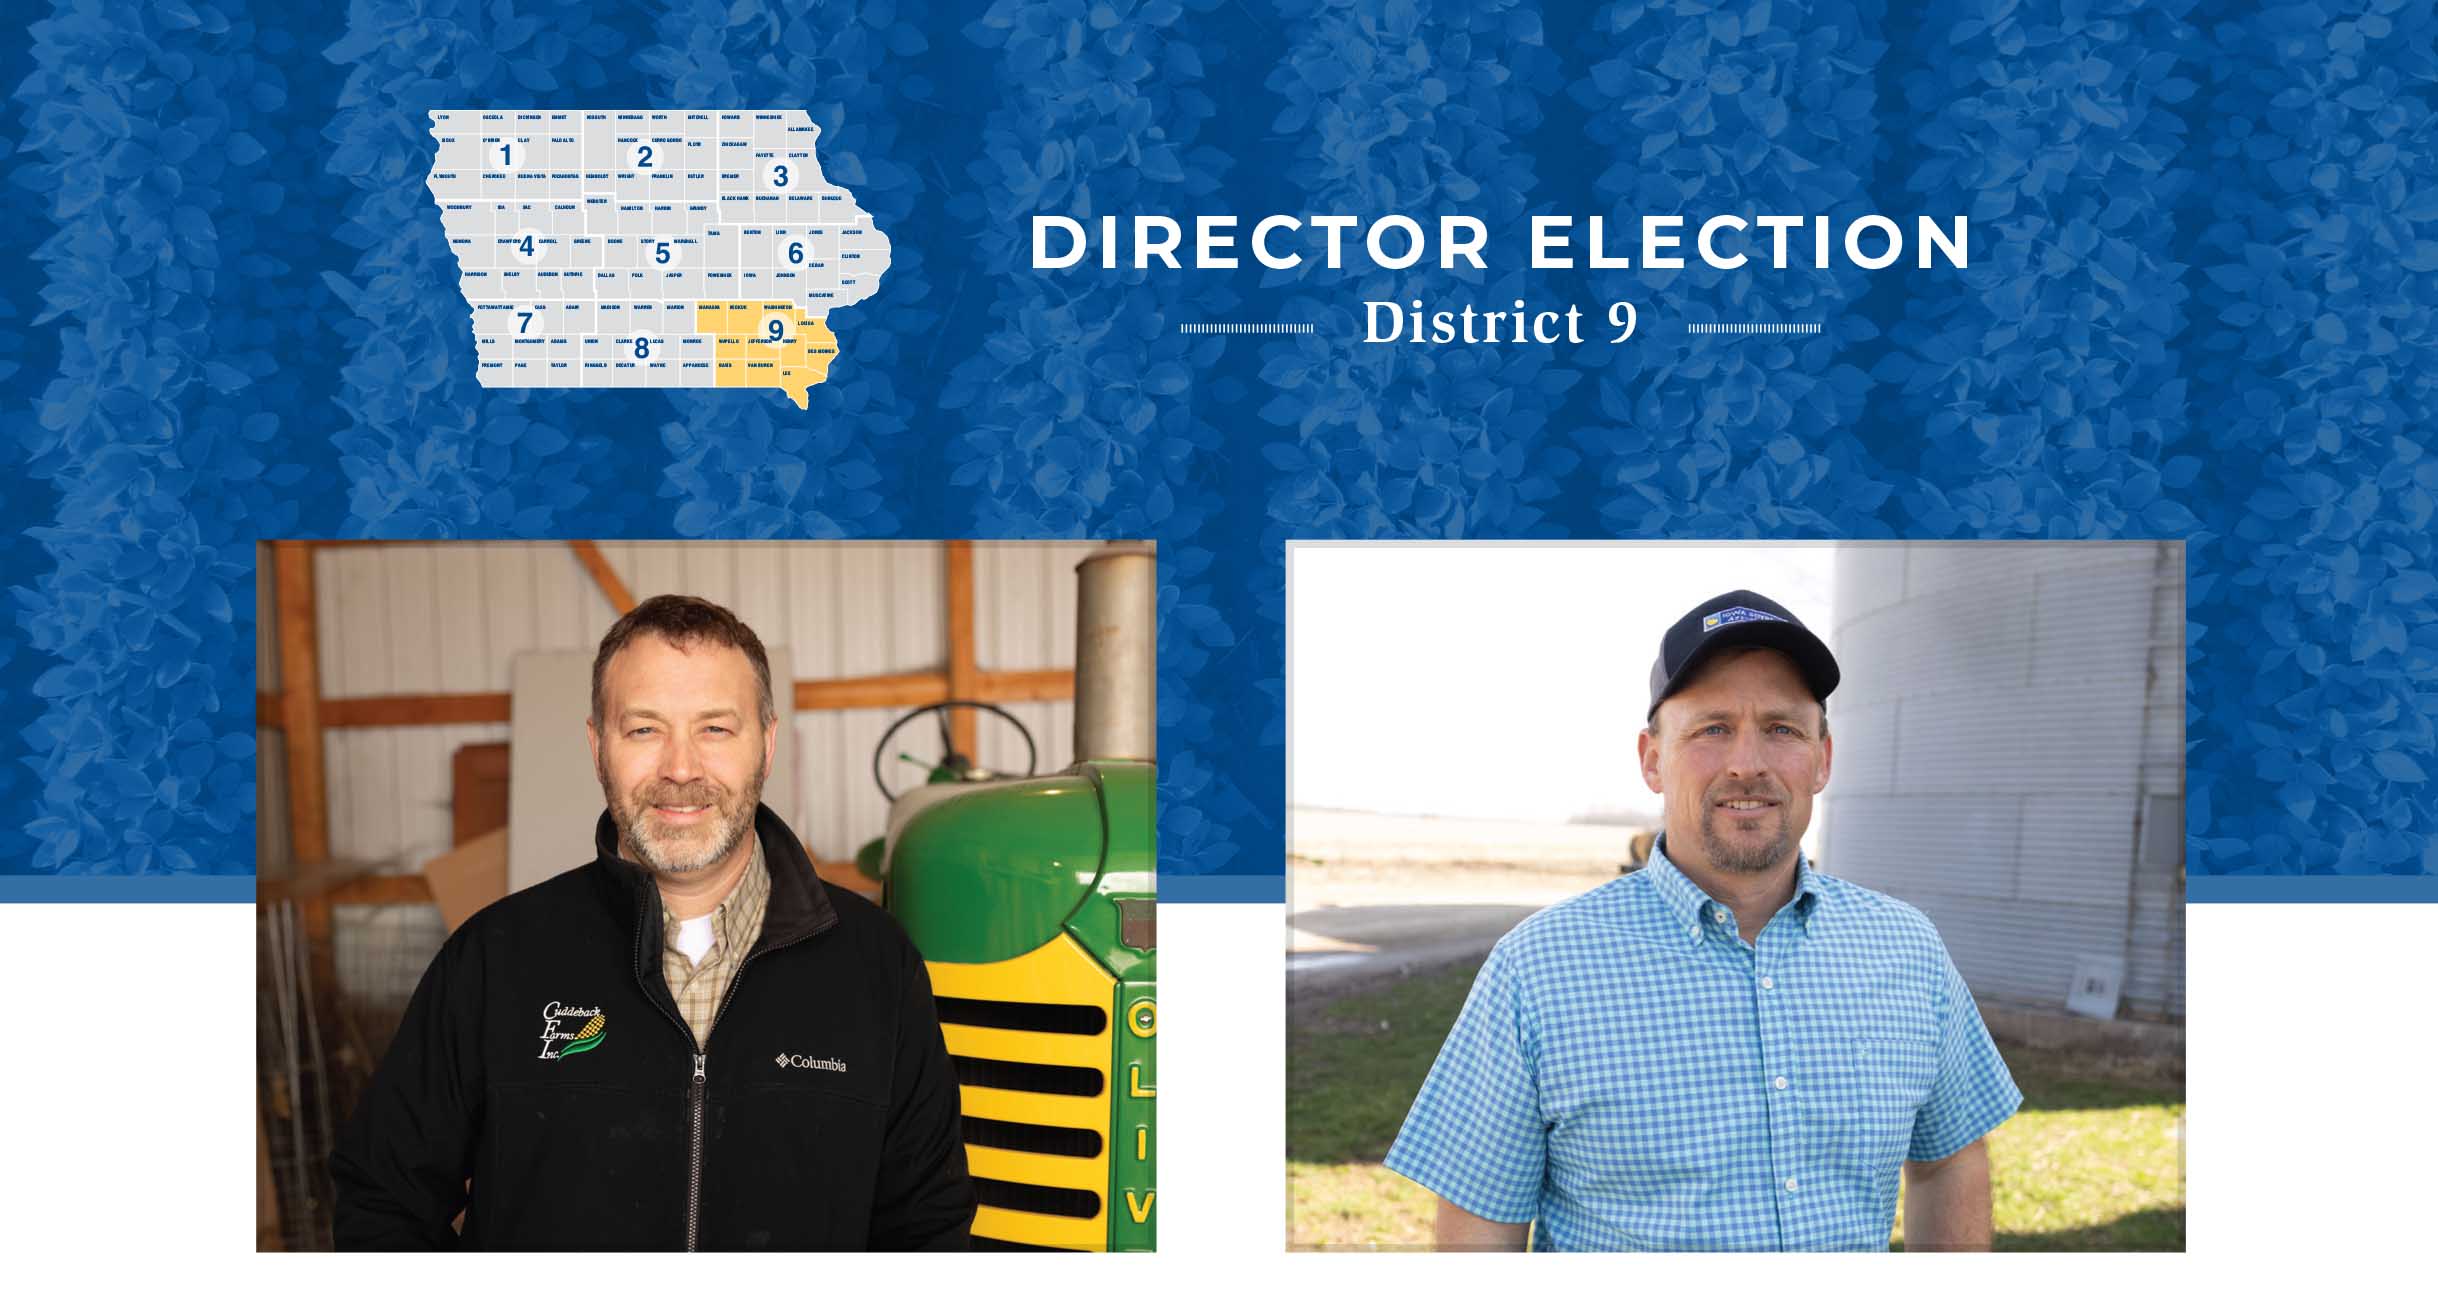 Farmers running for District 9